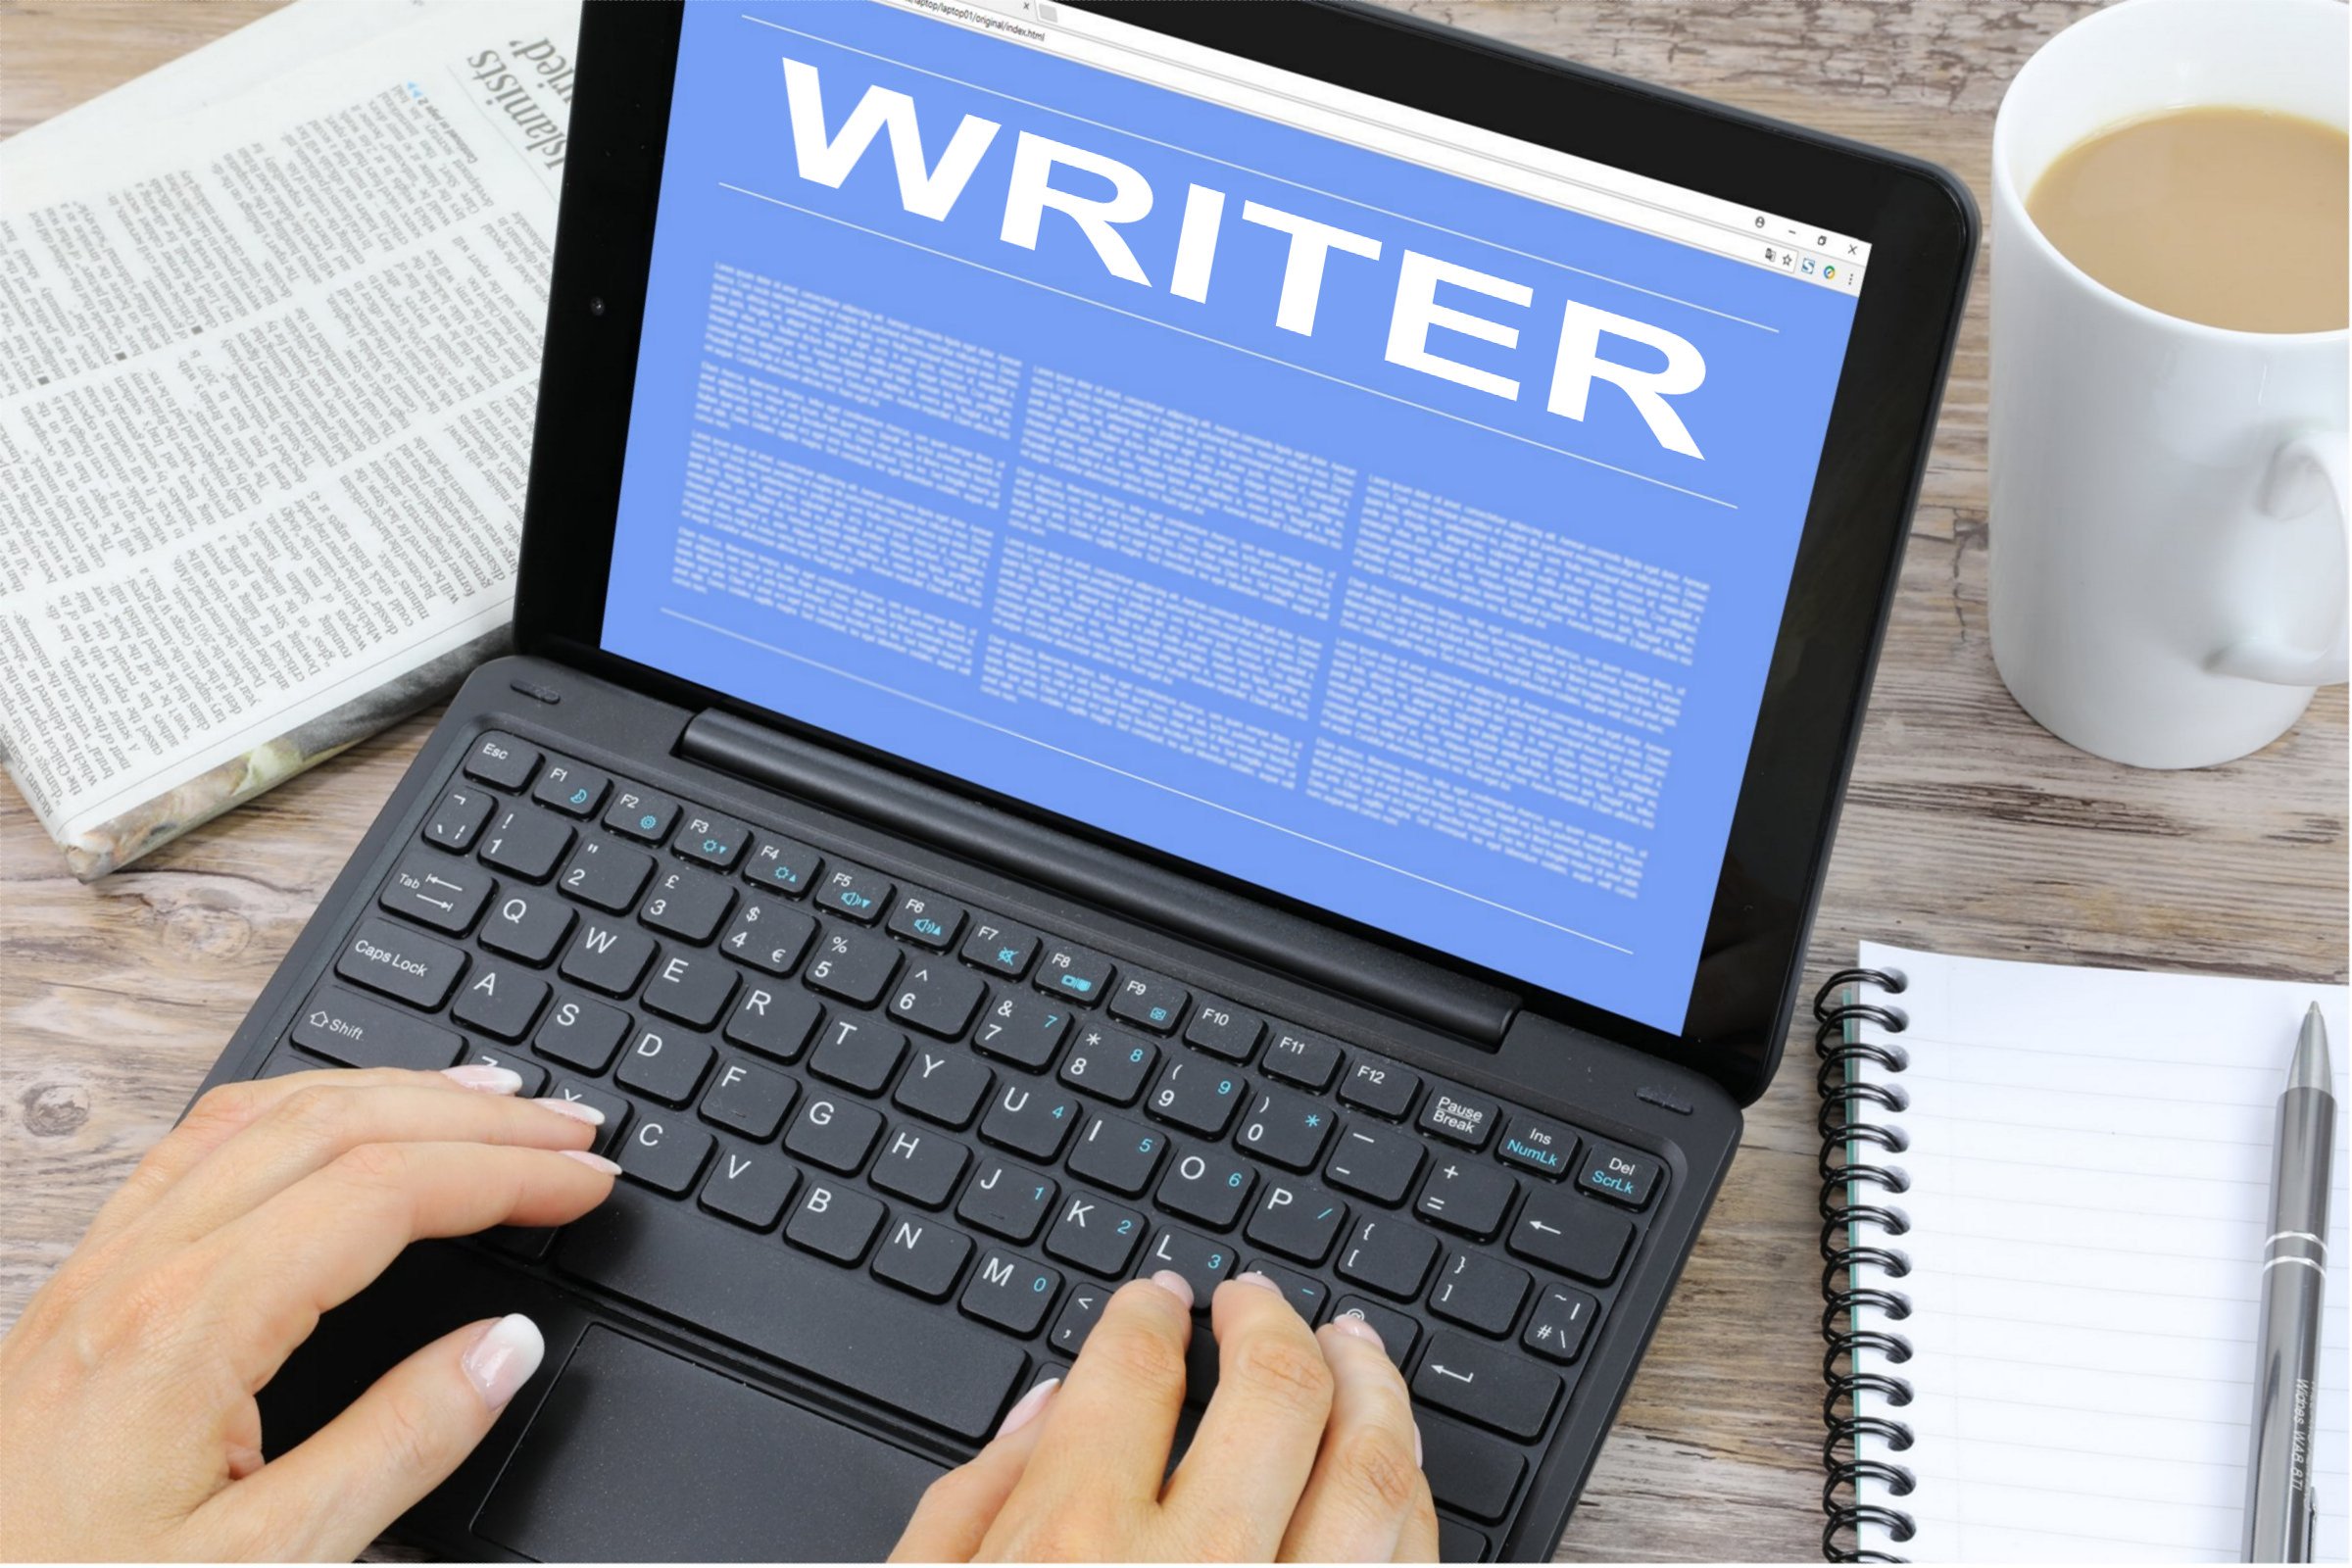 Black laptop with blue screen with white text saying "writer" in all capital letters. Hands hover over the keyboard.